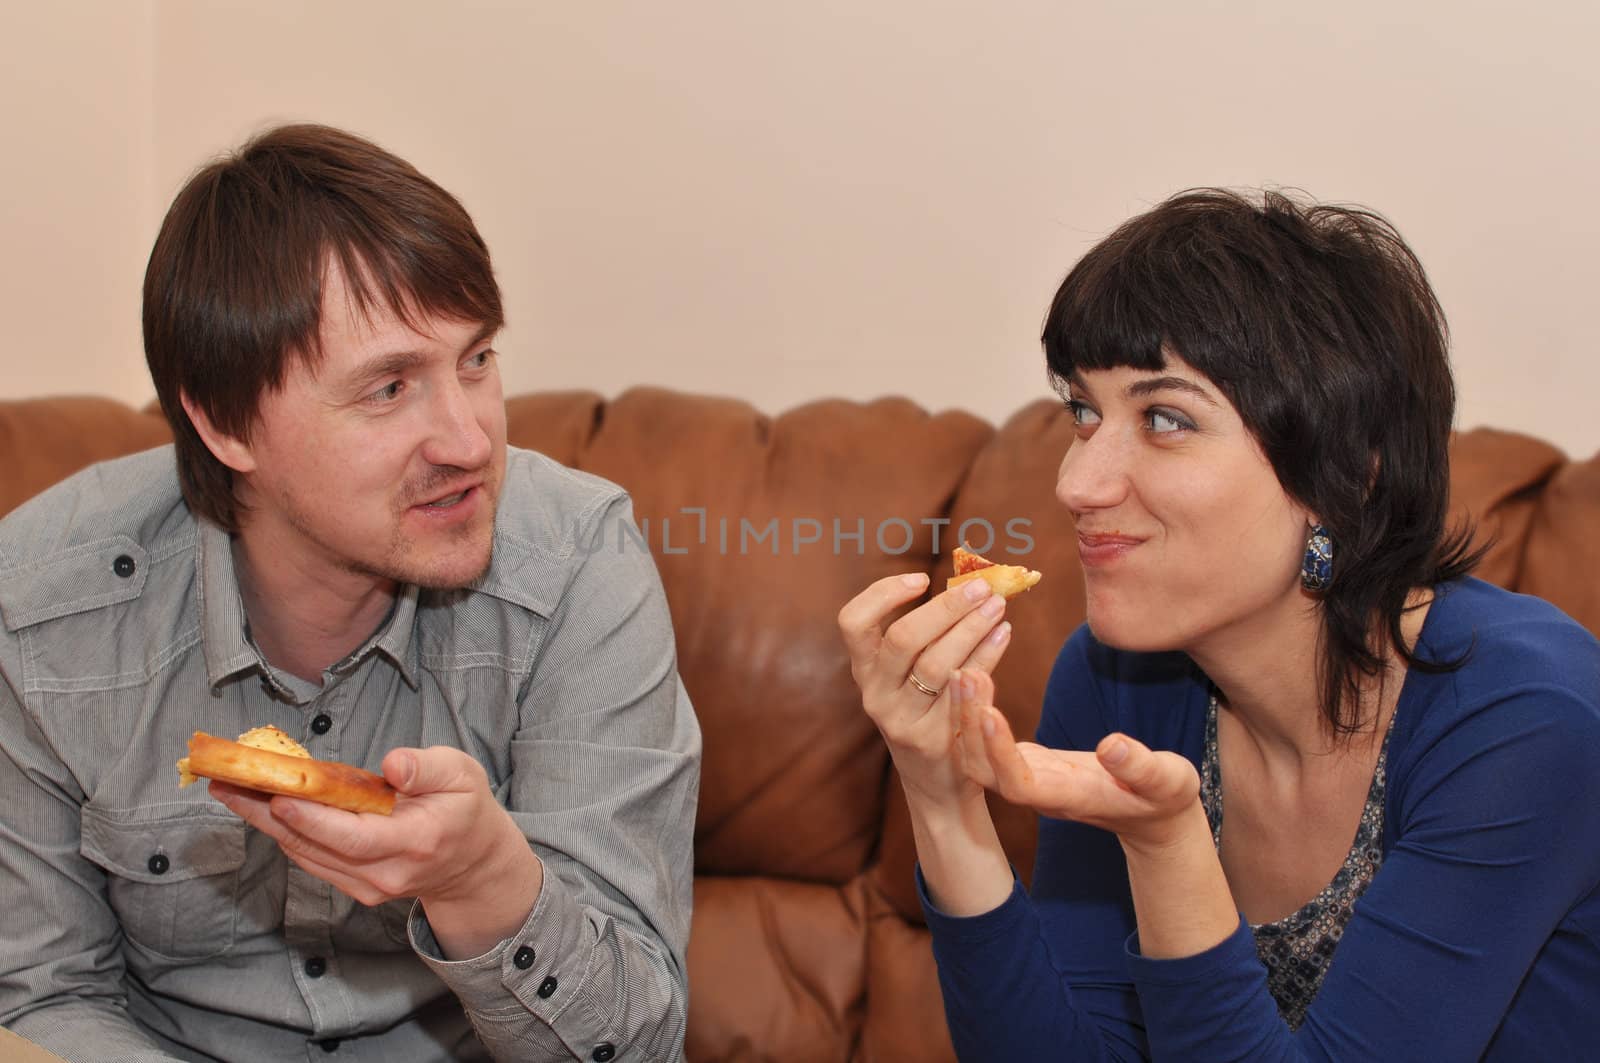 Married couple eating pizza and smiling